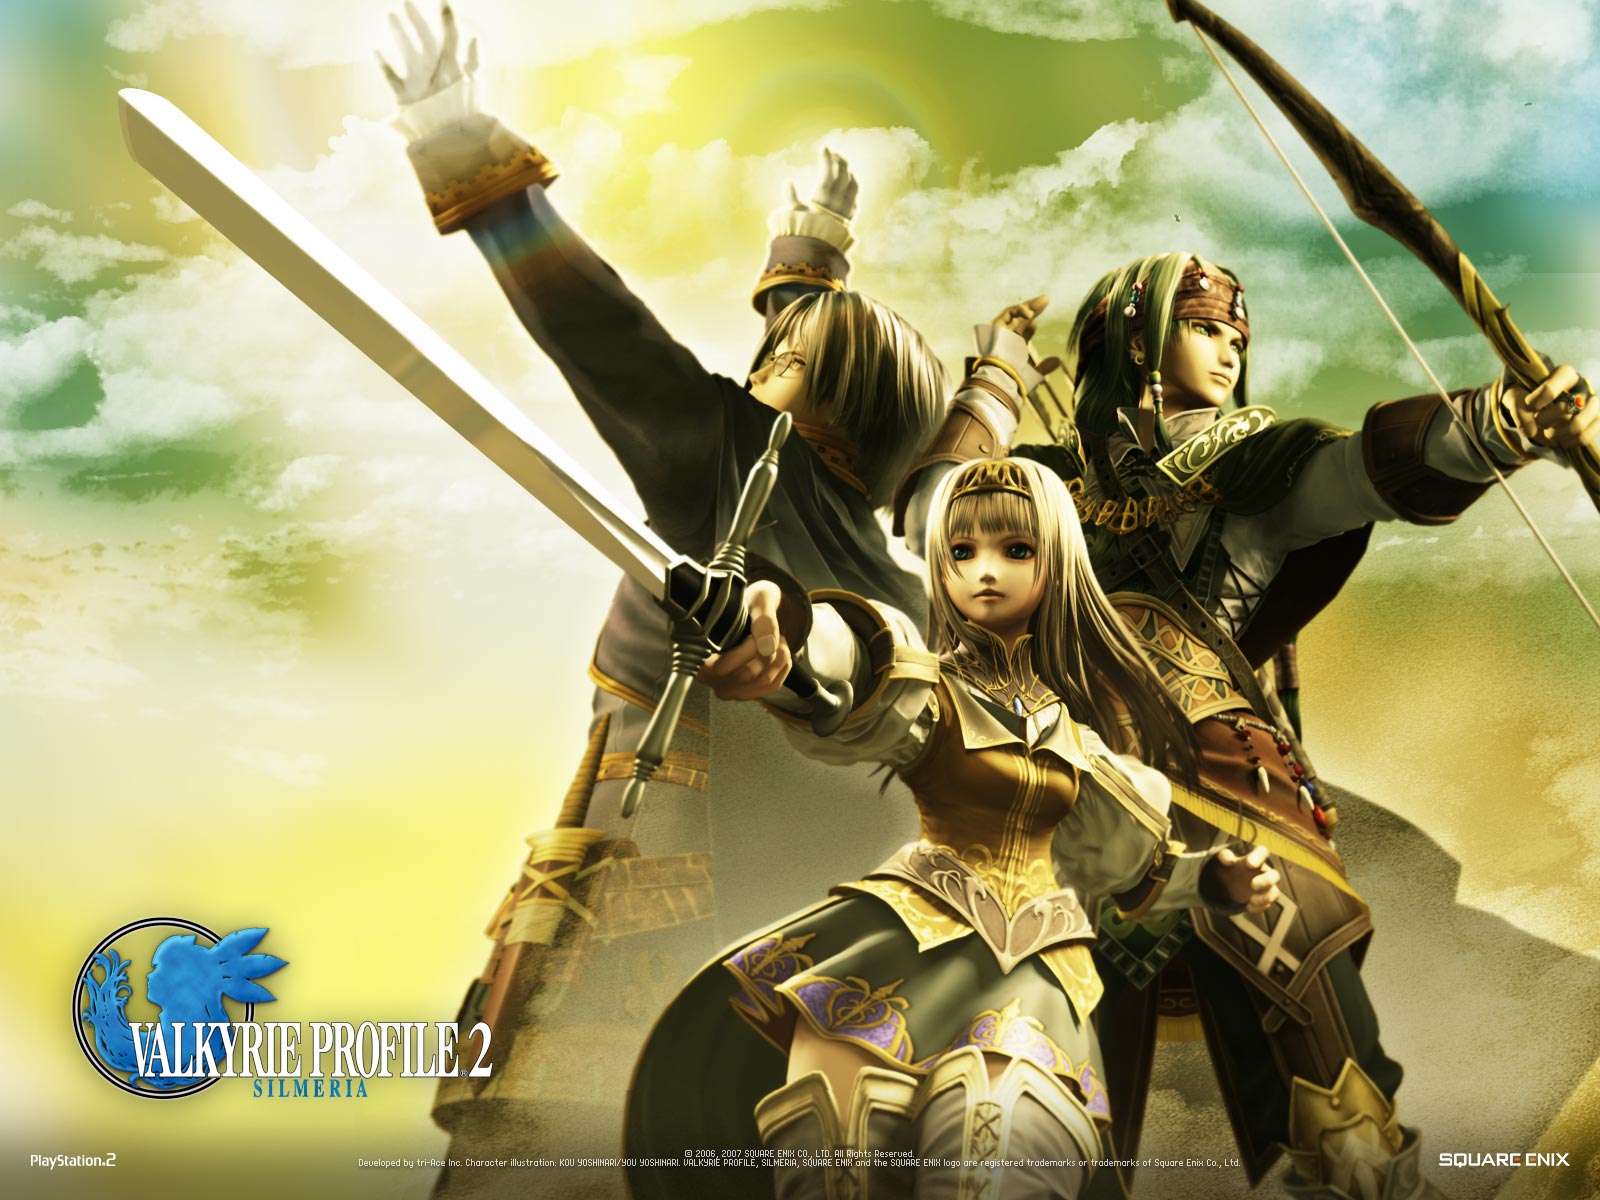 Amazing Valkyrie Profile 2: Simeria Pictures & Backgrounds